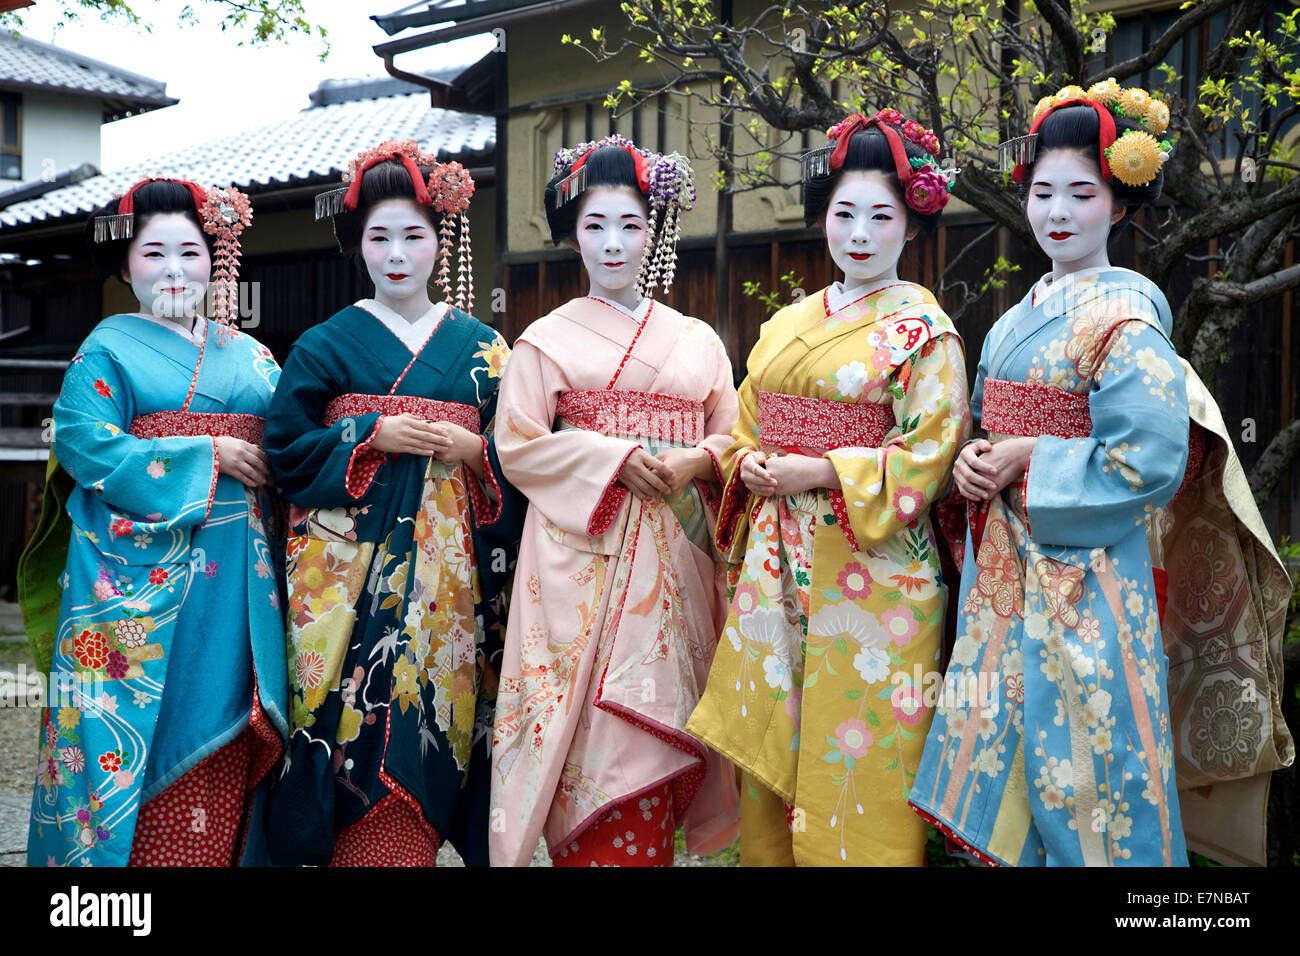 Group of Japanese women, geishas posing for a picture, Gion area, Kyoto, Japan, Asia. Traditional geisha make-up and dress Stock Photo